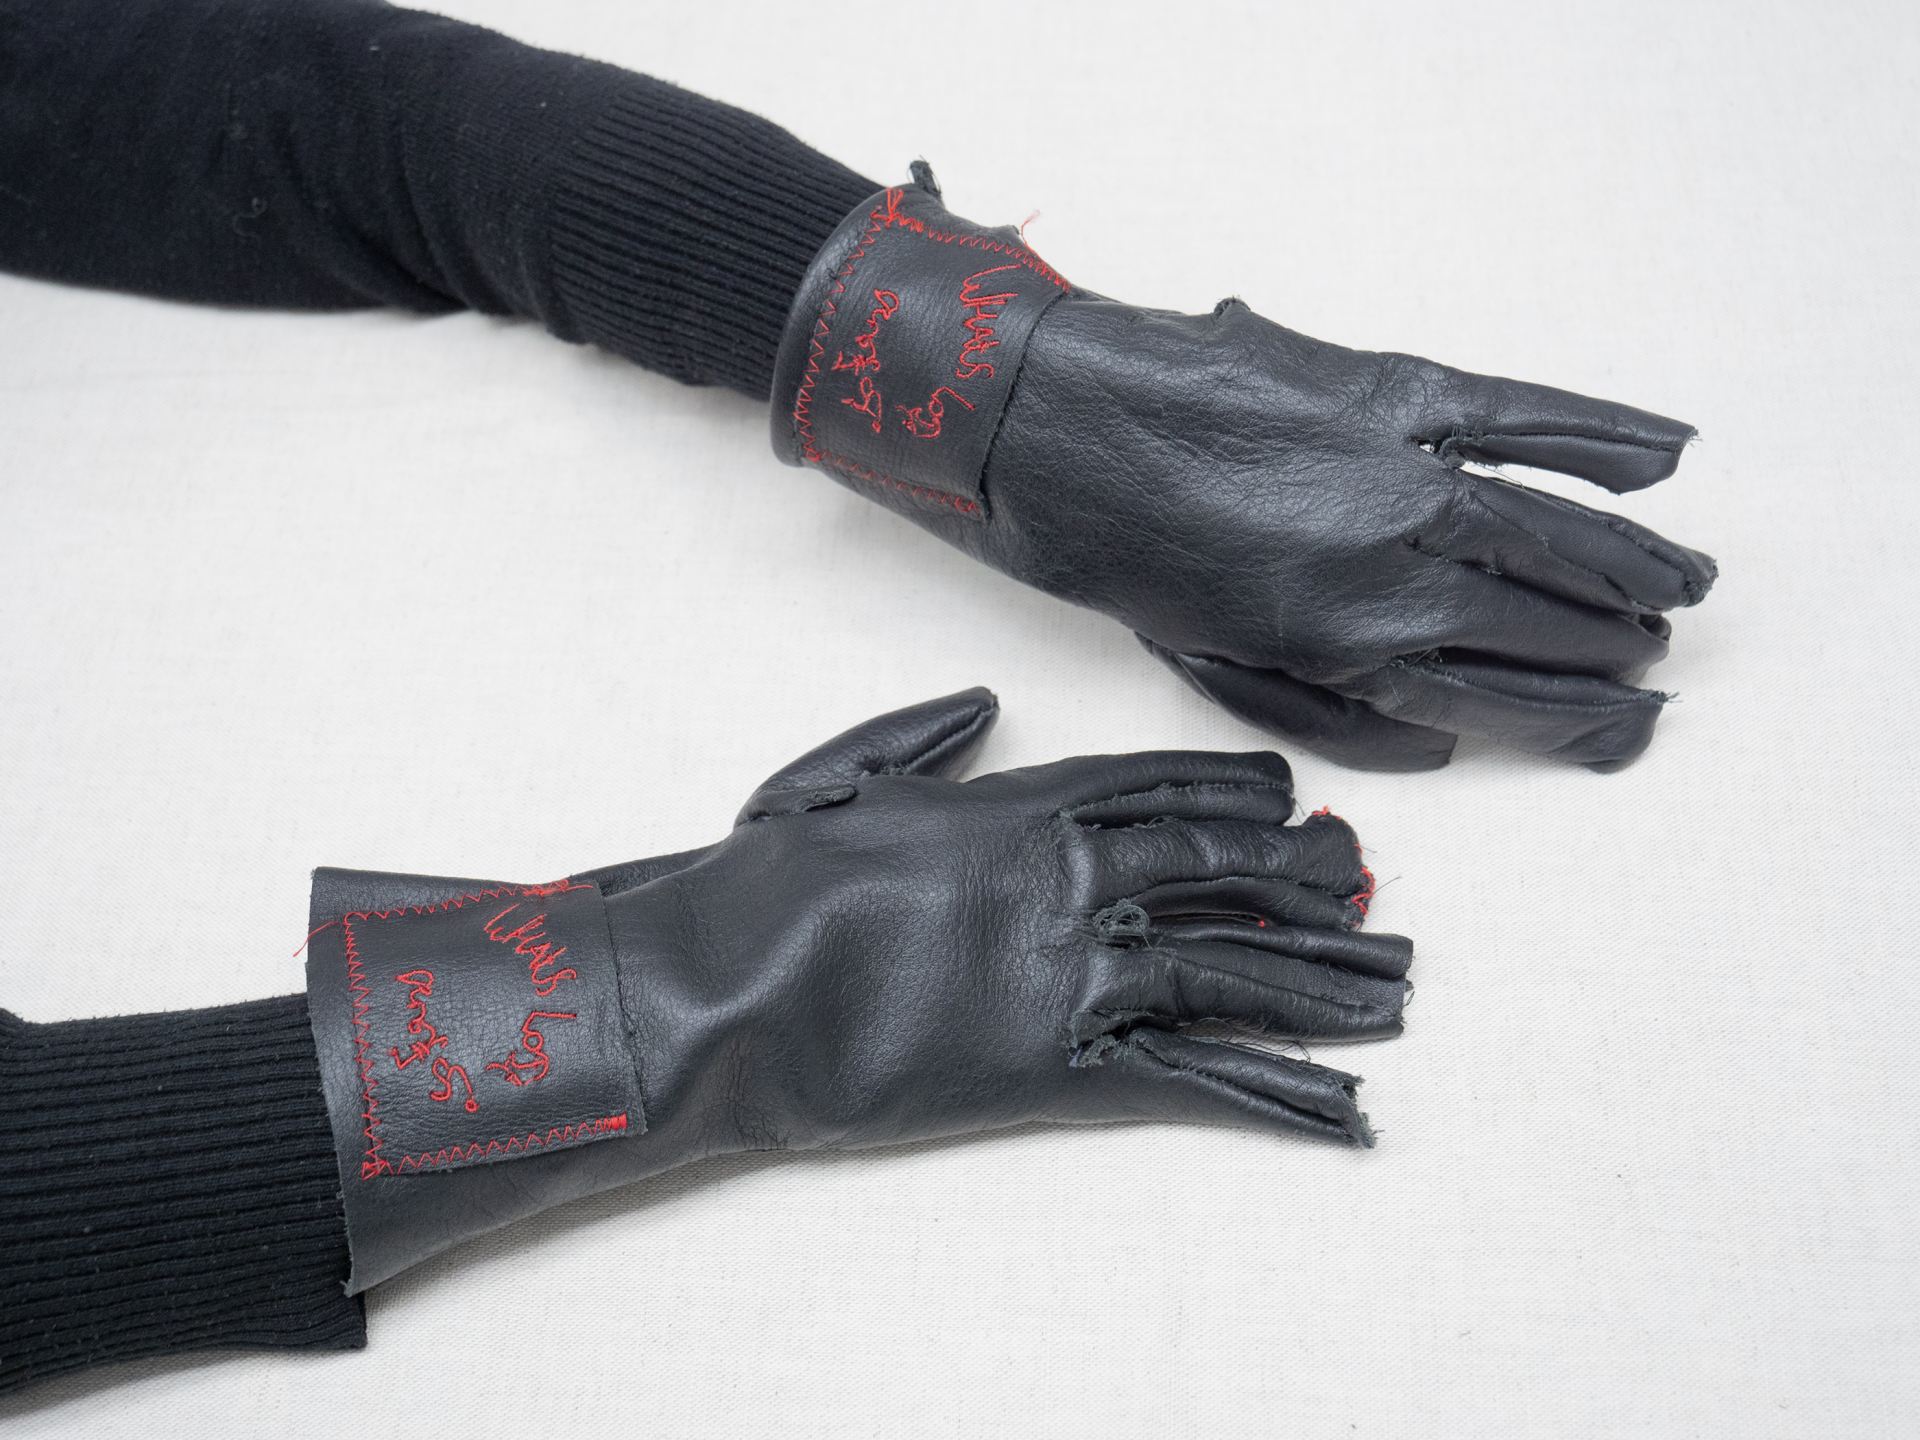 A photo of a person wearing a pair of black leather gloves embroidered with red thread.